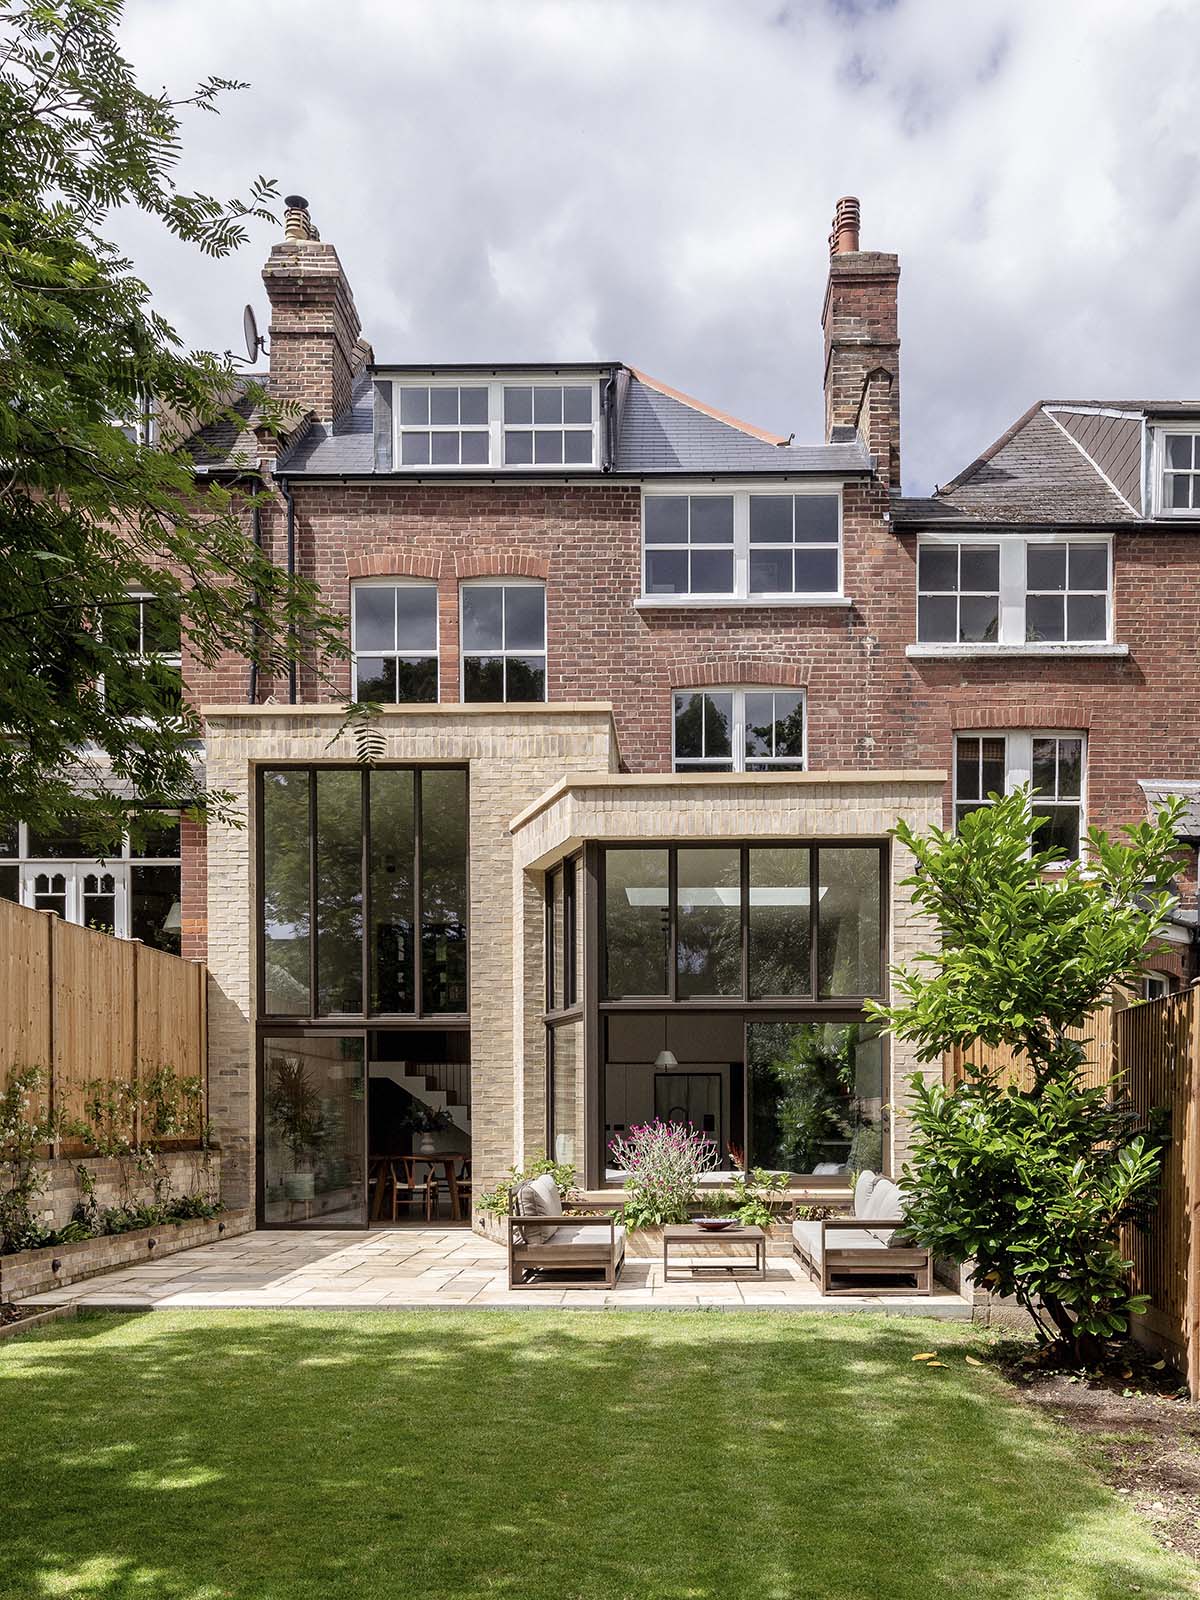 Emil Eve renovation on Talbot Road in London - pictured is the rear exterior